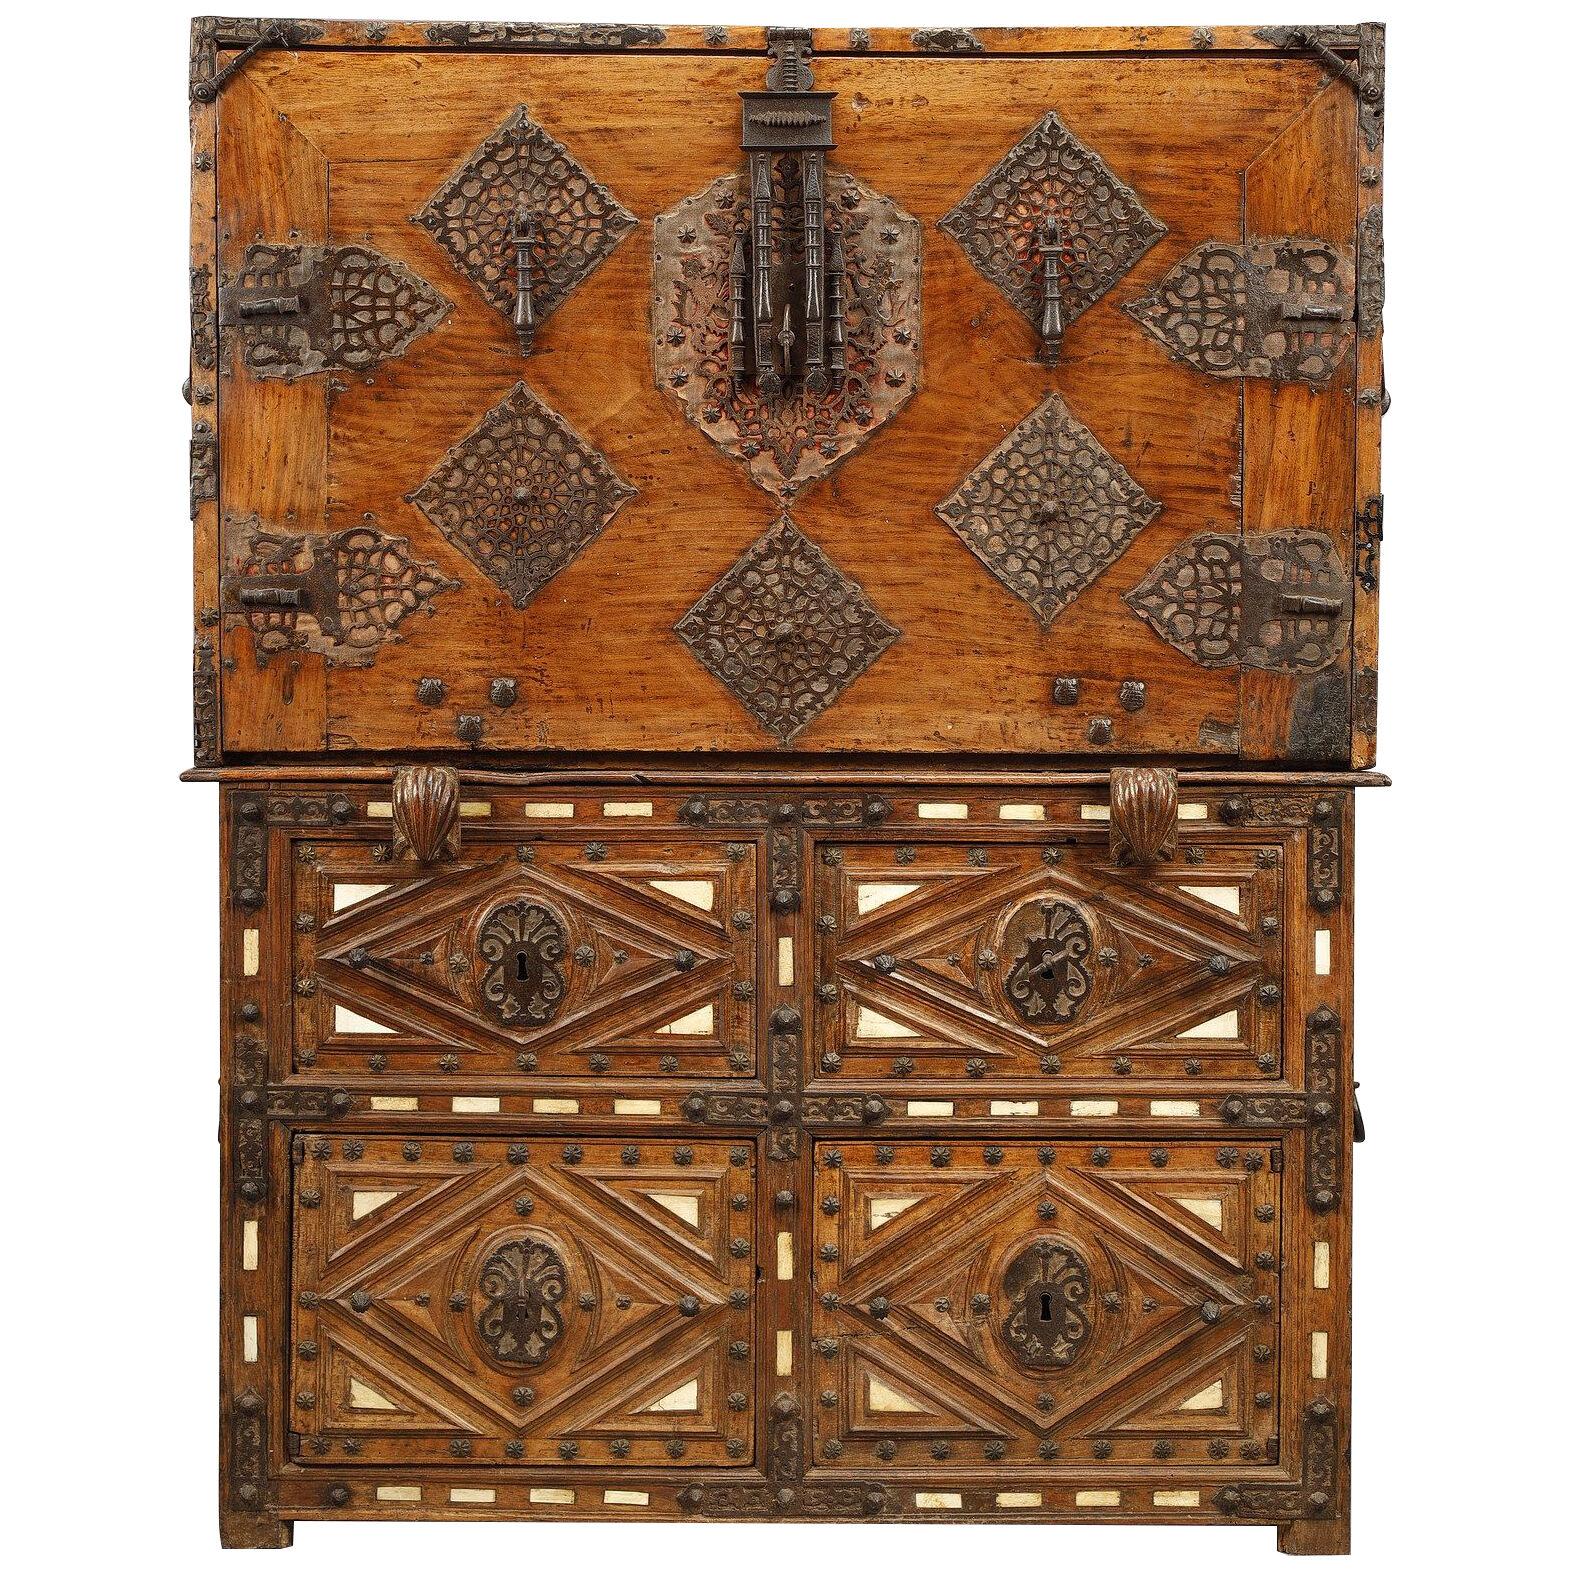 17th century spanish Bargueno and Taquillon in walnut and bone marquetery